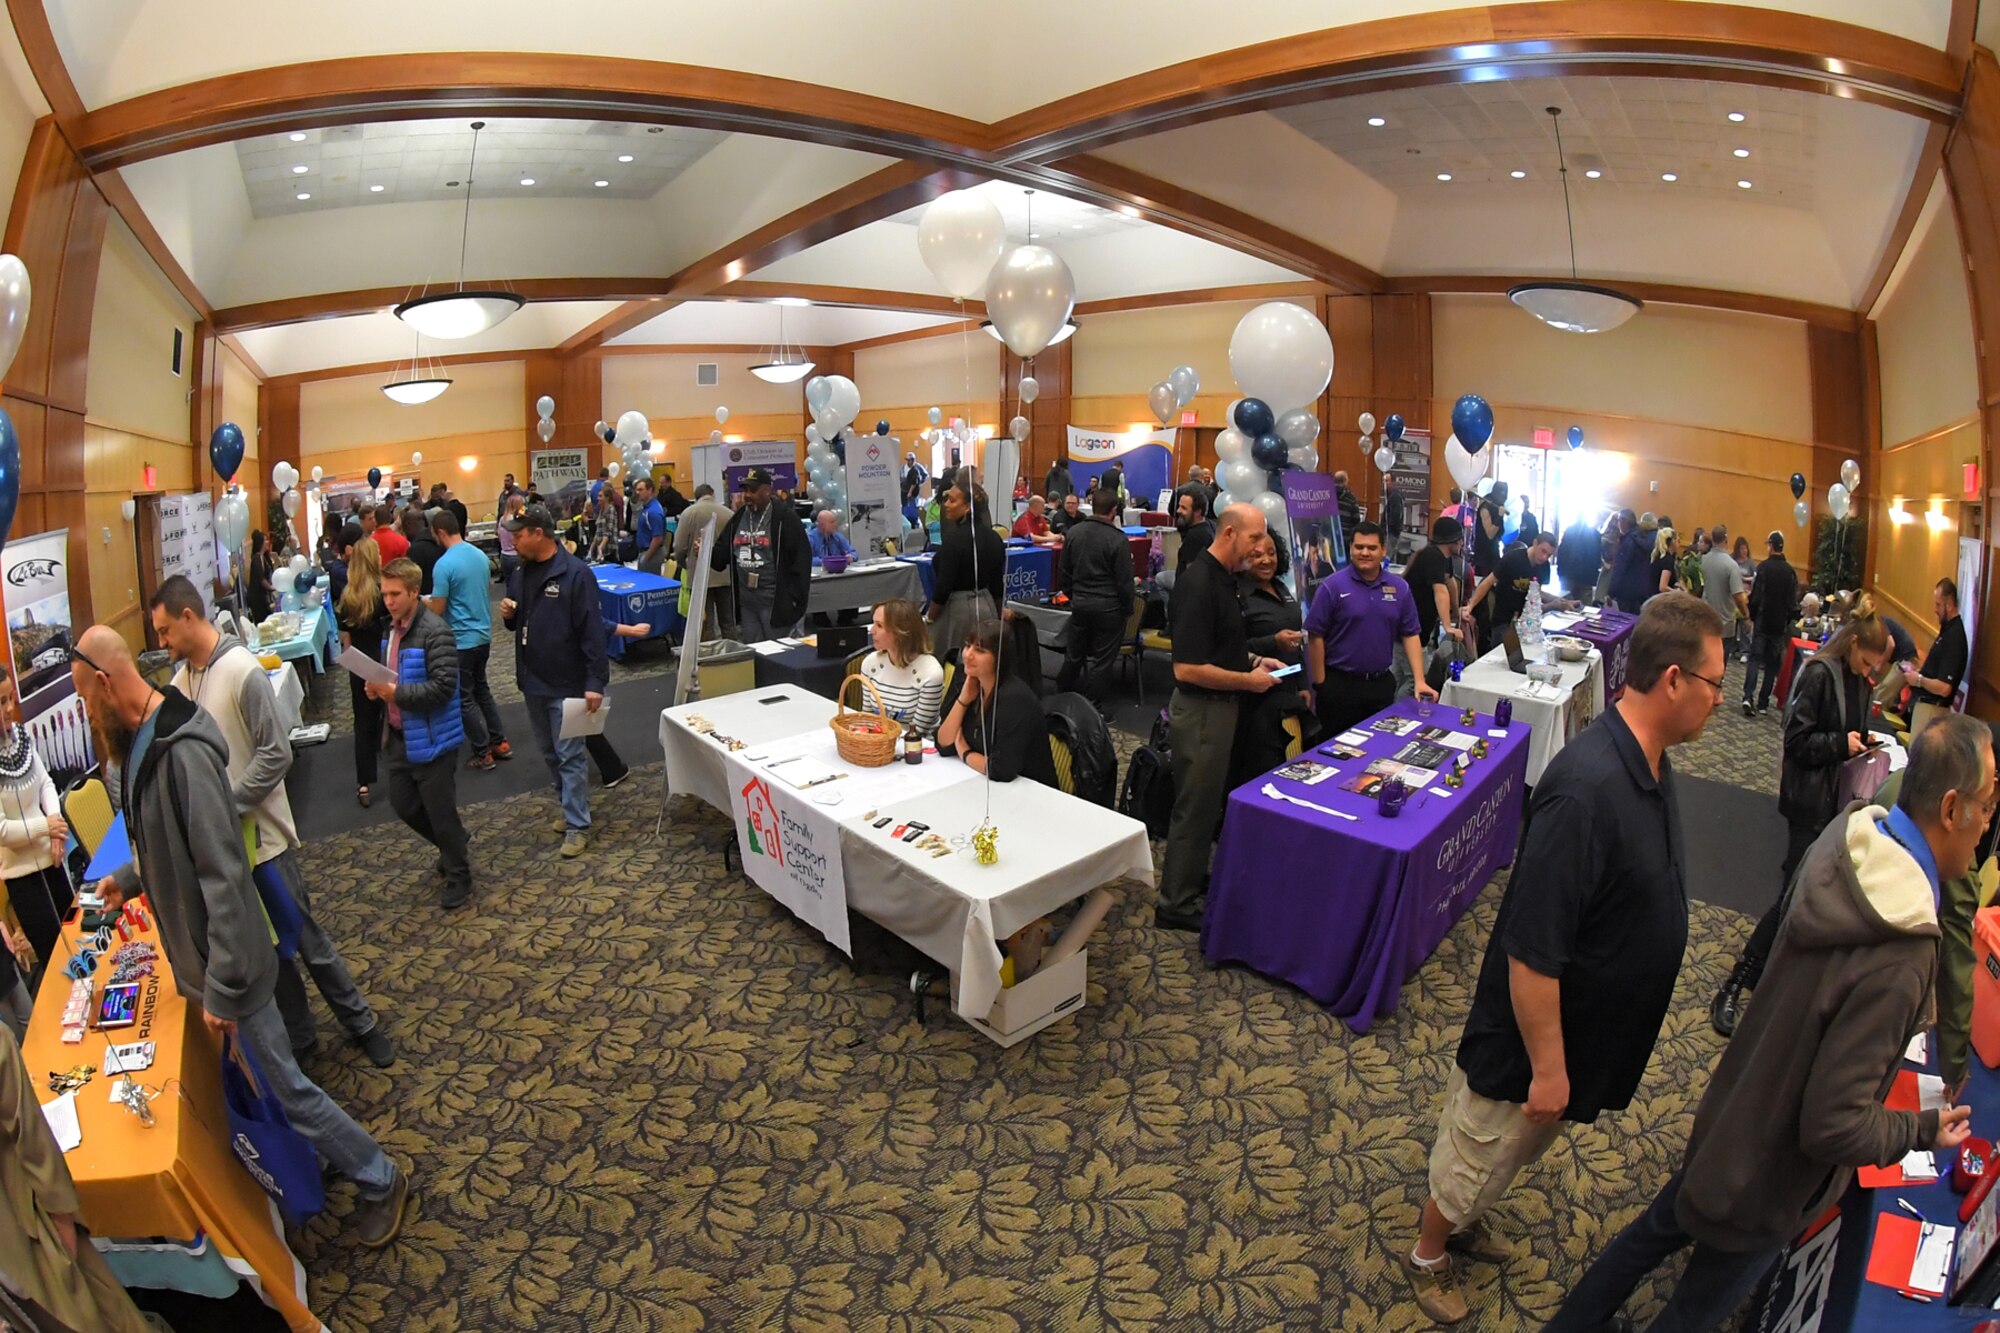 Military and civilians employees during the 75th Force Support Squadron Winter Expo Nov. 15, 2018, at Hill Air Force Base, Utah. This year's expo showcased vendors and information from 30 colleges, local ski resorts and even Disney, with the intent of building a thriving and resilient community through travel, recreation, education, wellness, and fun. (U.S. Air Force photo by Todd Cromar)